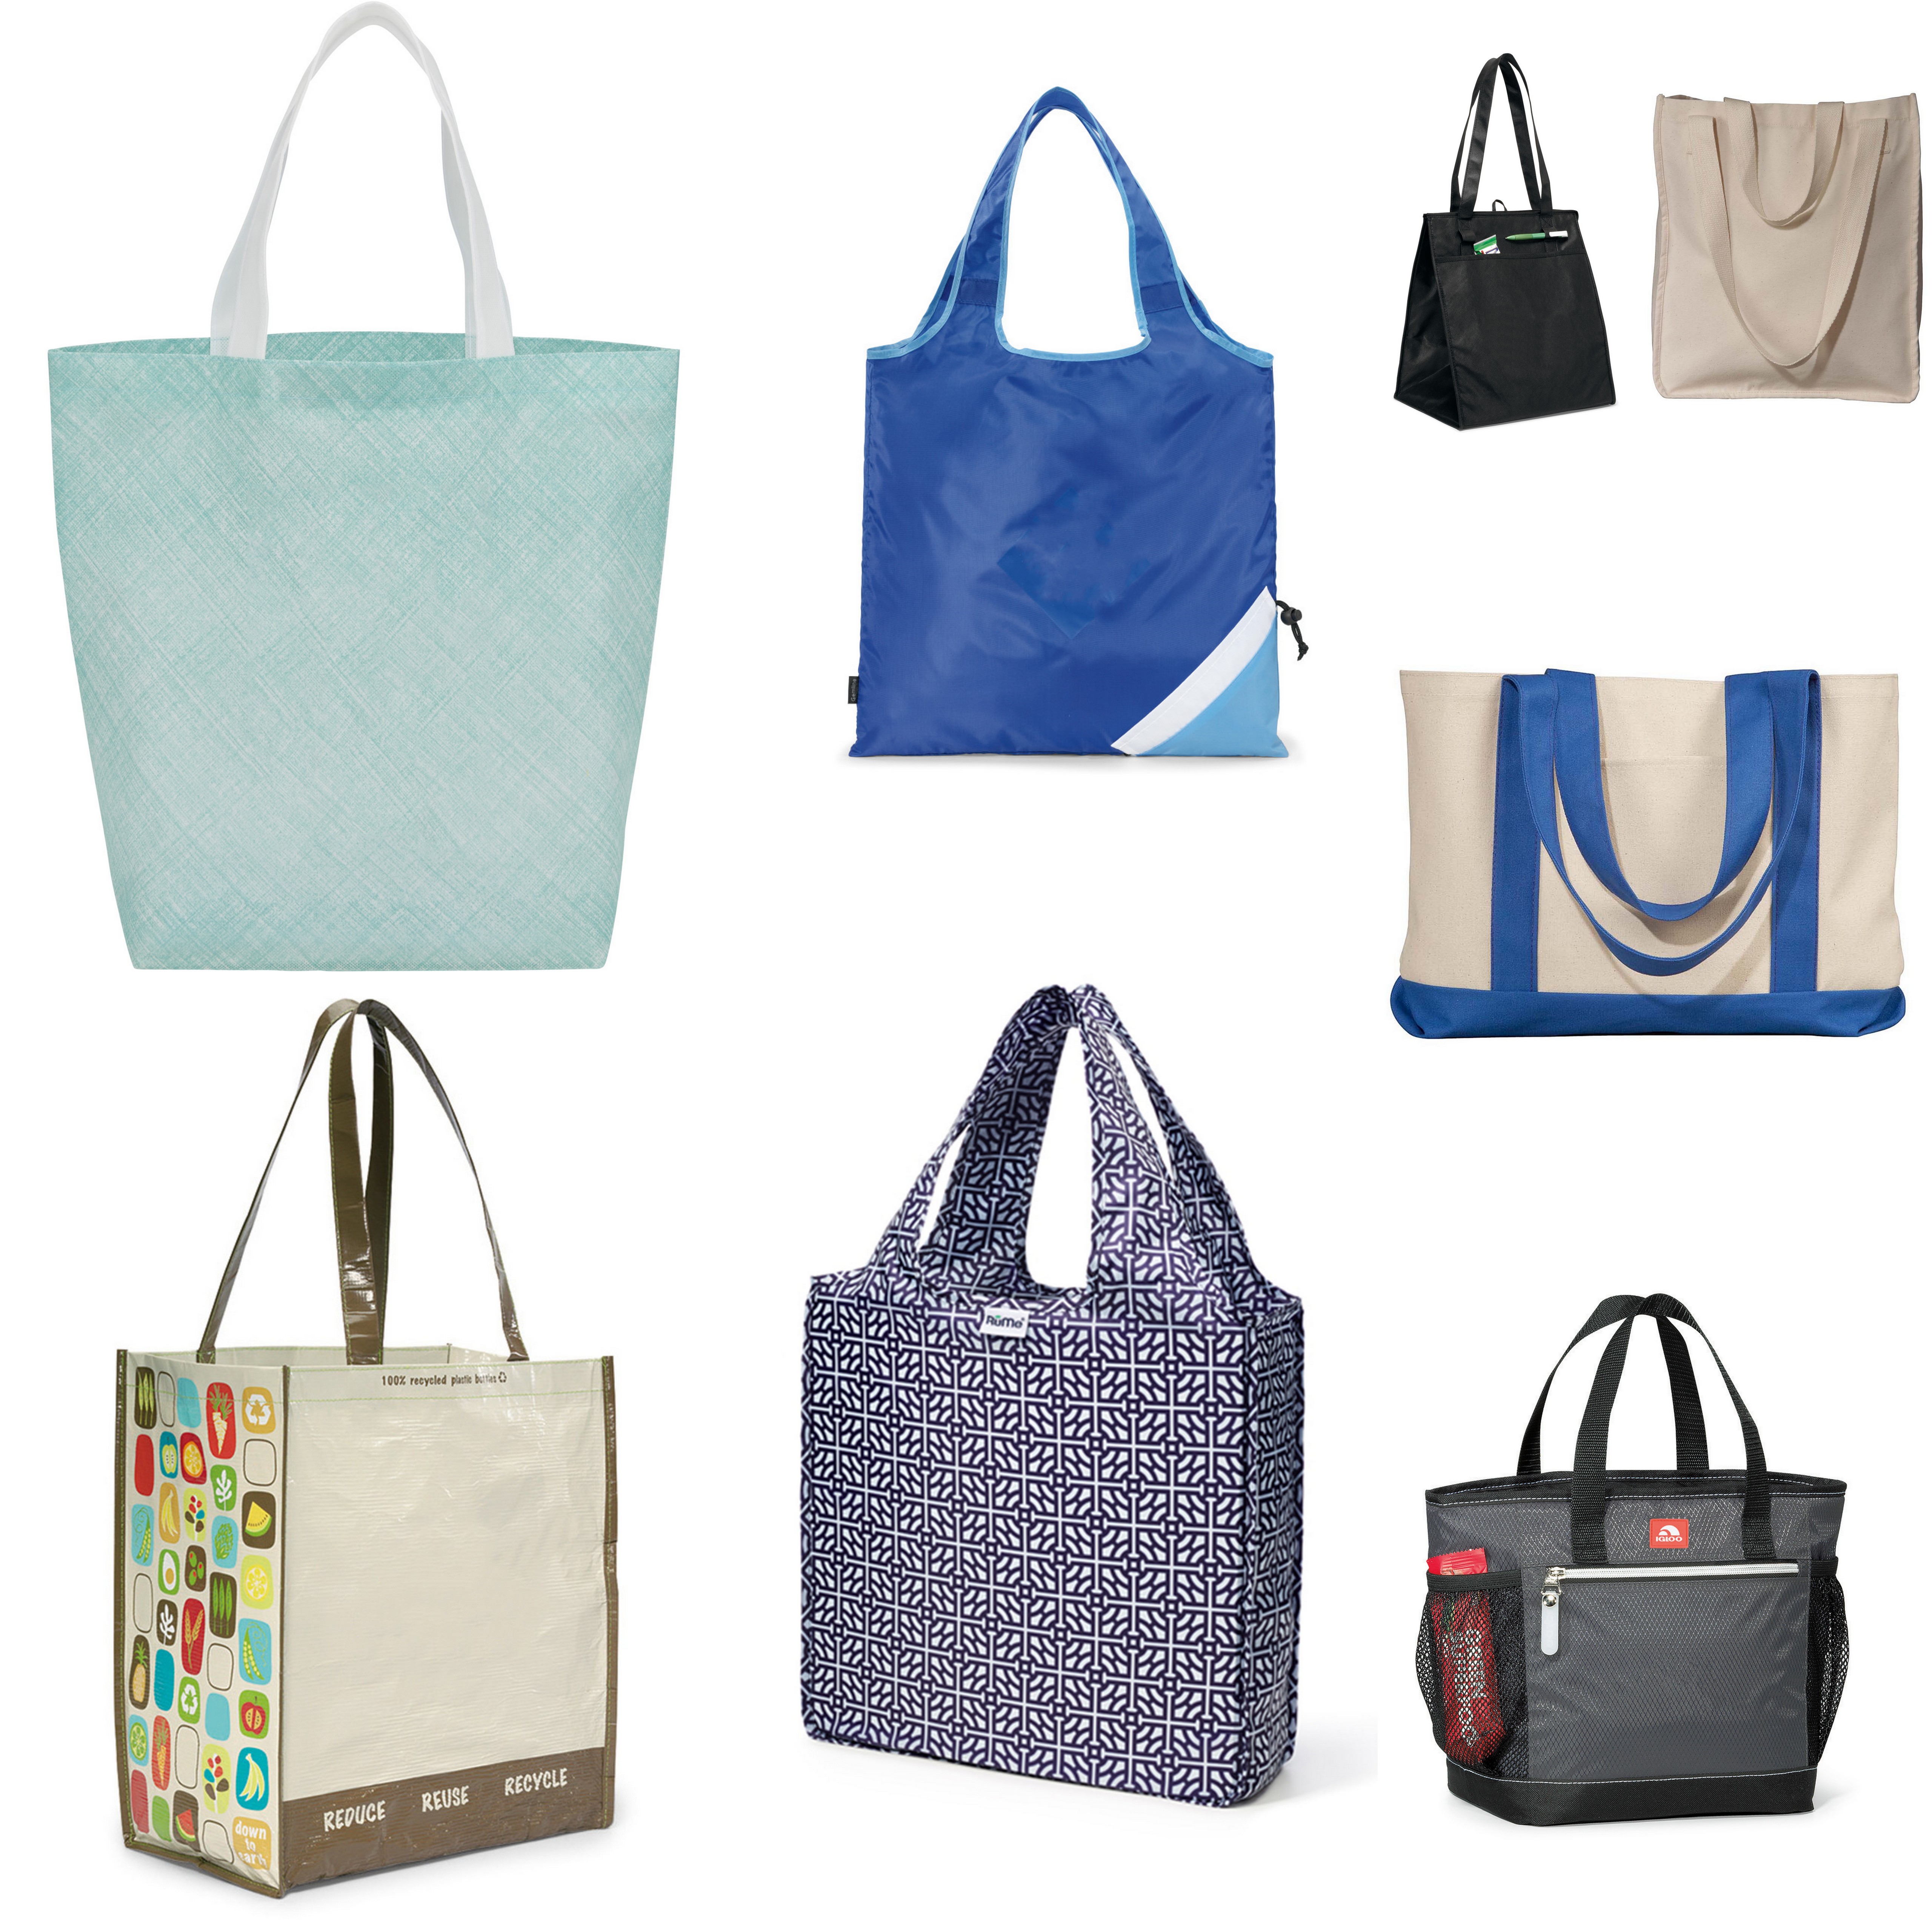 4 Types of Custom Reusable Shopping Bags from NYFifth